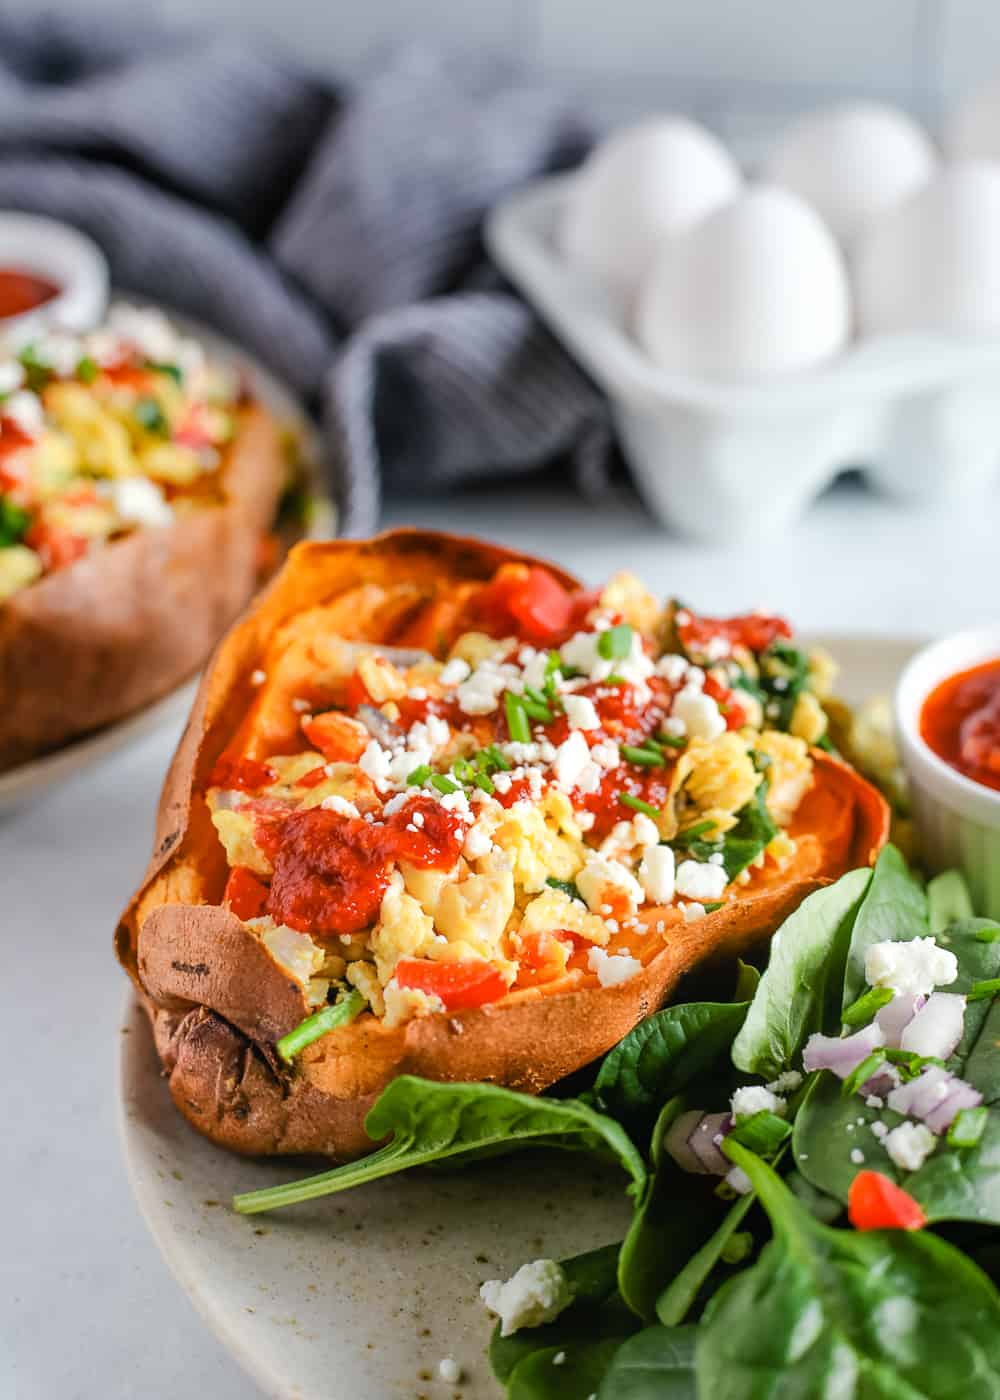 A stuffed sweet potato with scrambled eggs, spinach, and veggies on a plate on a kitchen countertop. A second serving is plated in the background